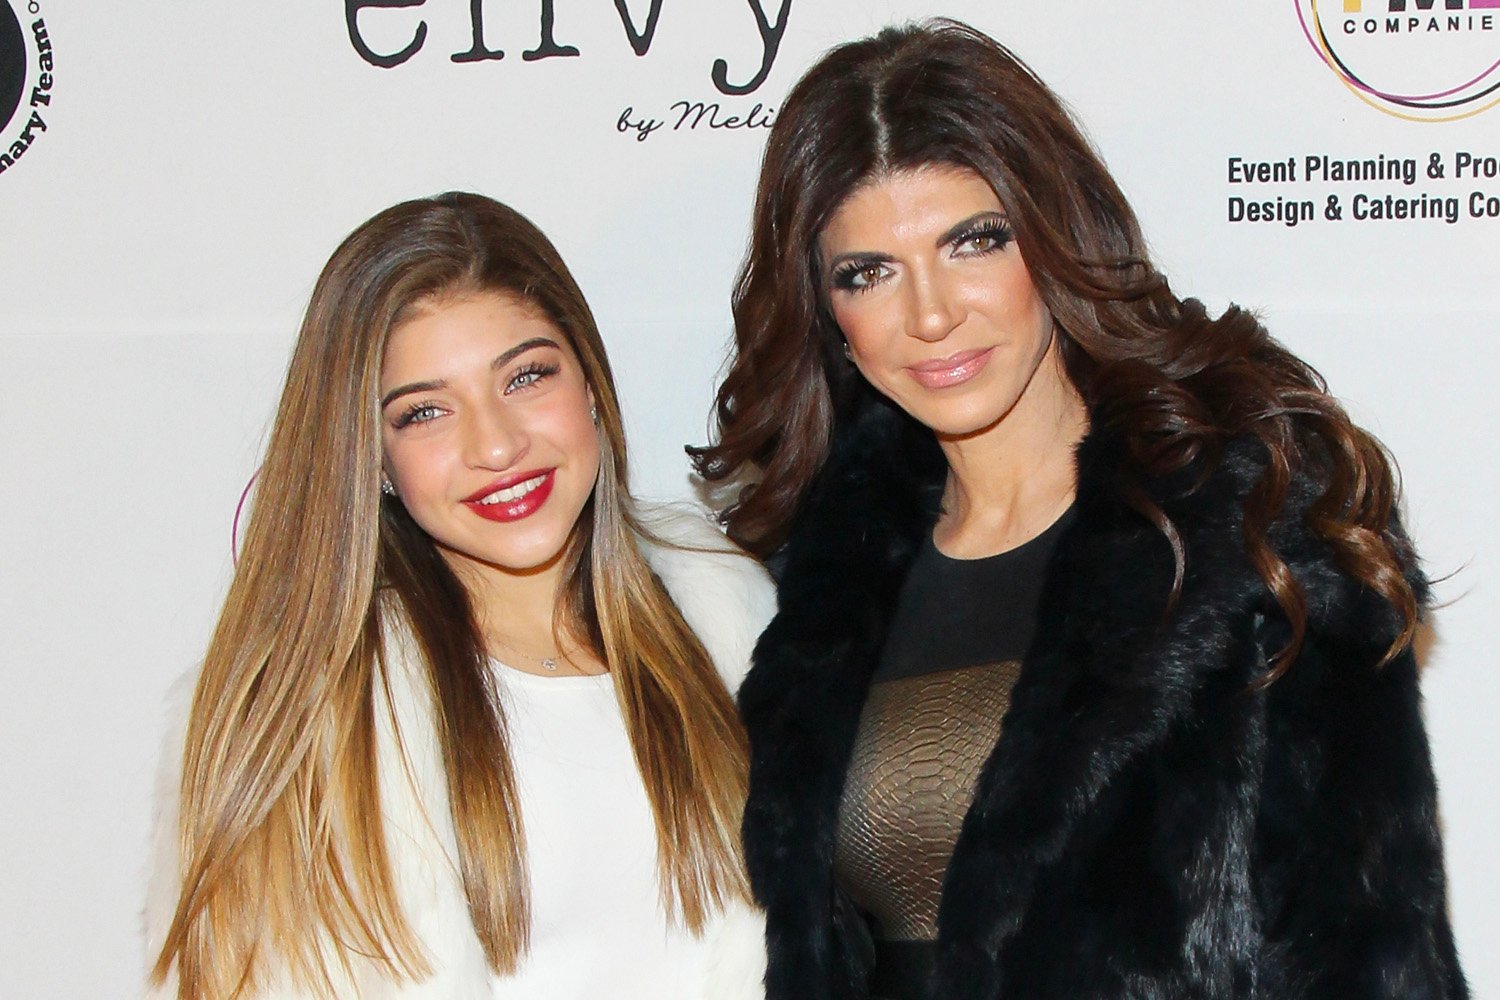 Teresa Giudice and daughter Gia pose at a red carpet event in 2016